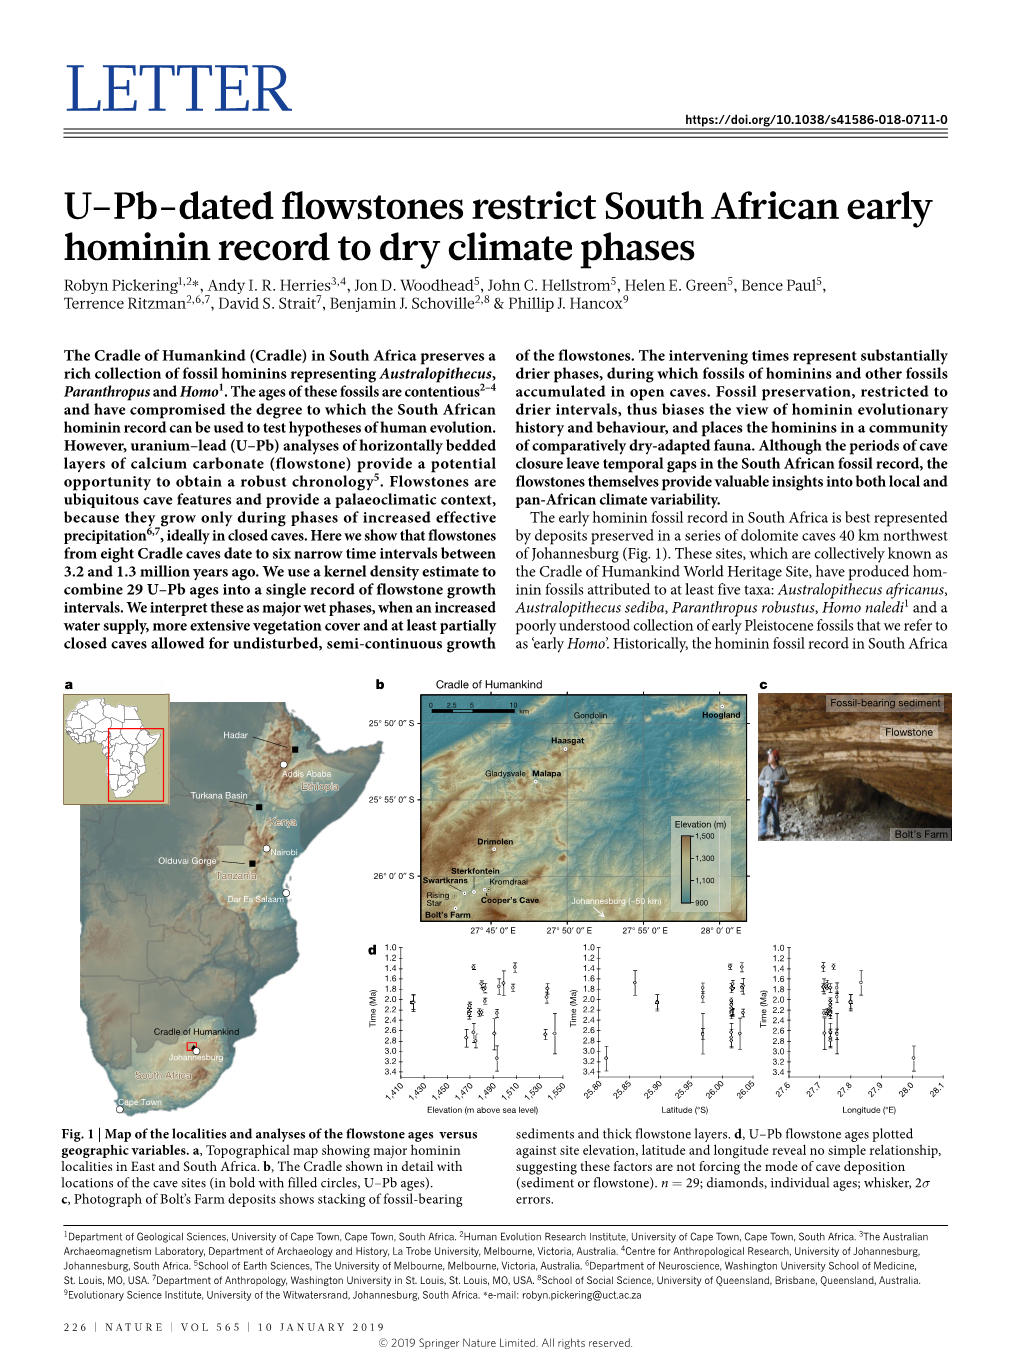 U–Pb-Dated Flowstones Restrict South African Early Hominin Record to Dry Climate Phases Robyn Pickering1,2*, Andy I